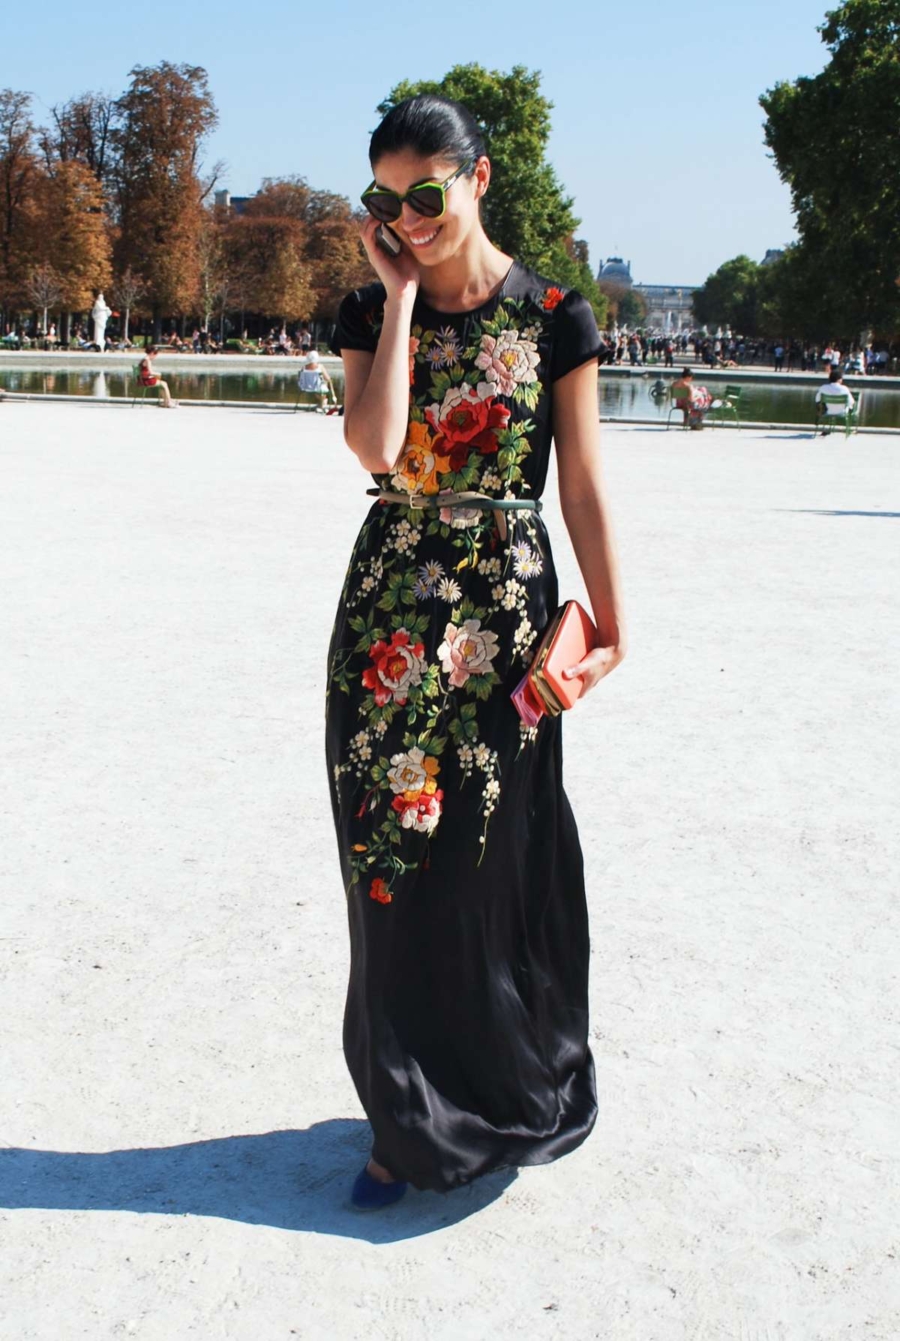 Floral Embroidered Dress - 7 Pieces That Look Adorable With Flower Embroidery // Notjessfashion.com